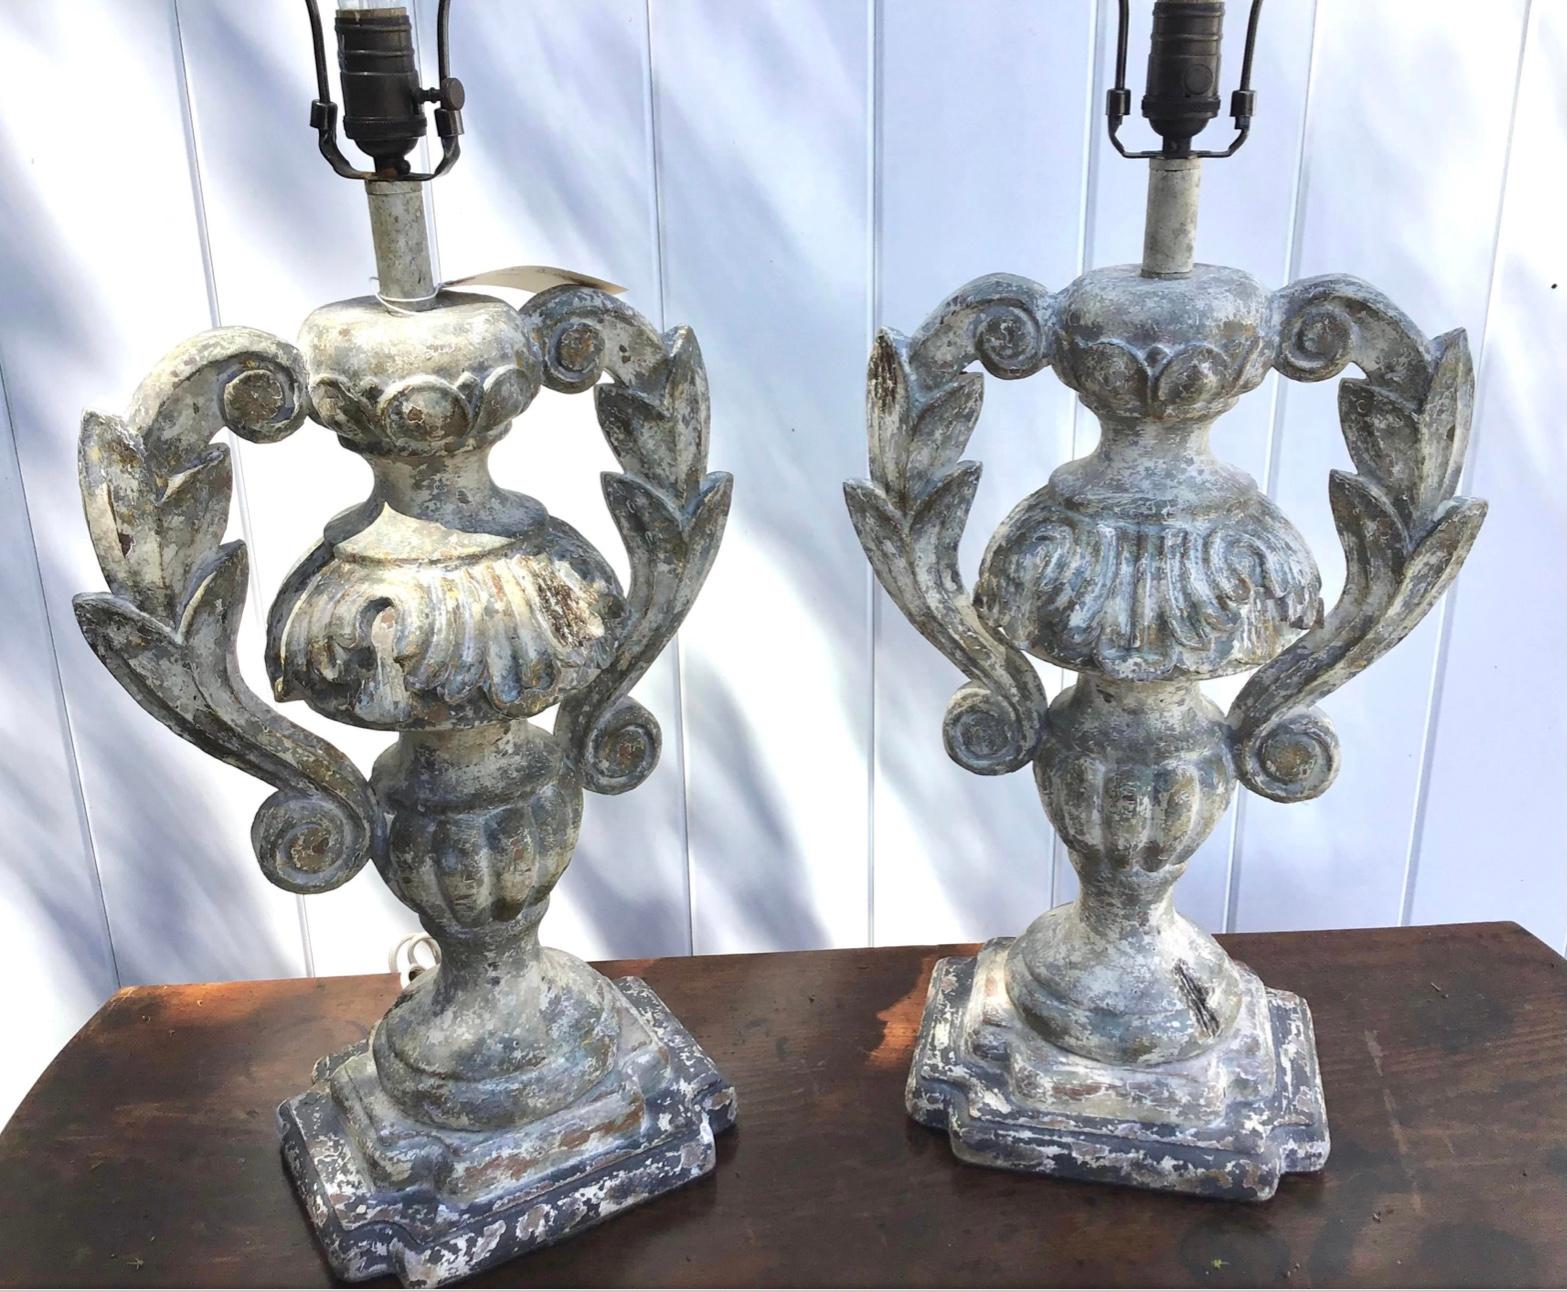 Carved and distressed wood Italian urn table lamps. This wonderful pair of lamps is a genuine designer pair, hand carved and finished in an old world distressed painted look. They are an exquisite example with a carved urn form. Wired and in working